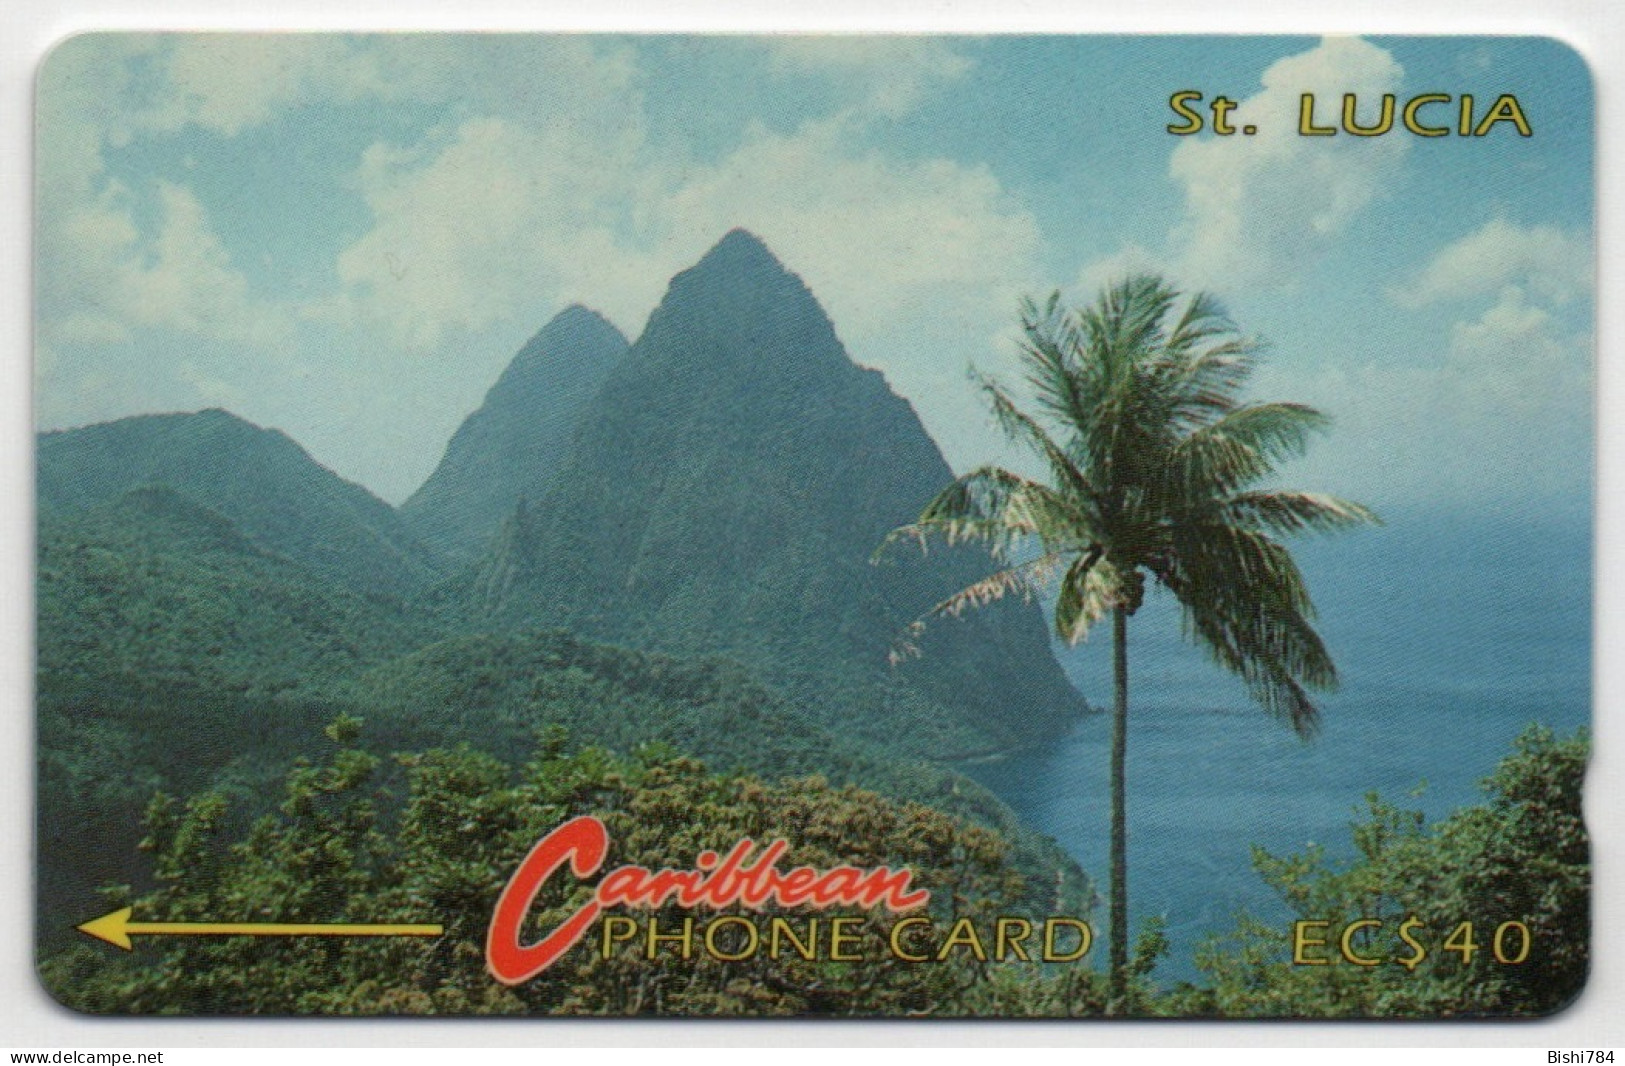 St. Lucia - Pitons - 3CSLC (Short, Italic Font With Curved 3) - Saint Lucia